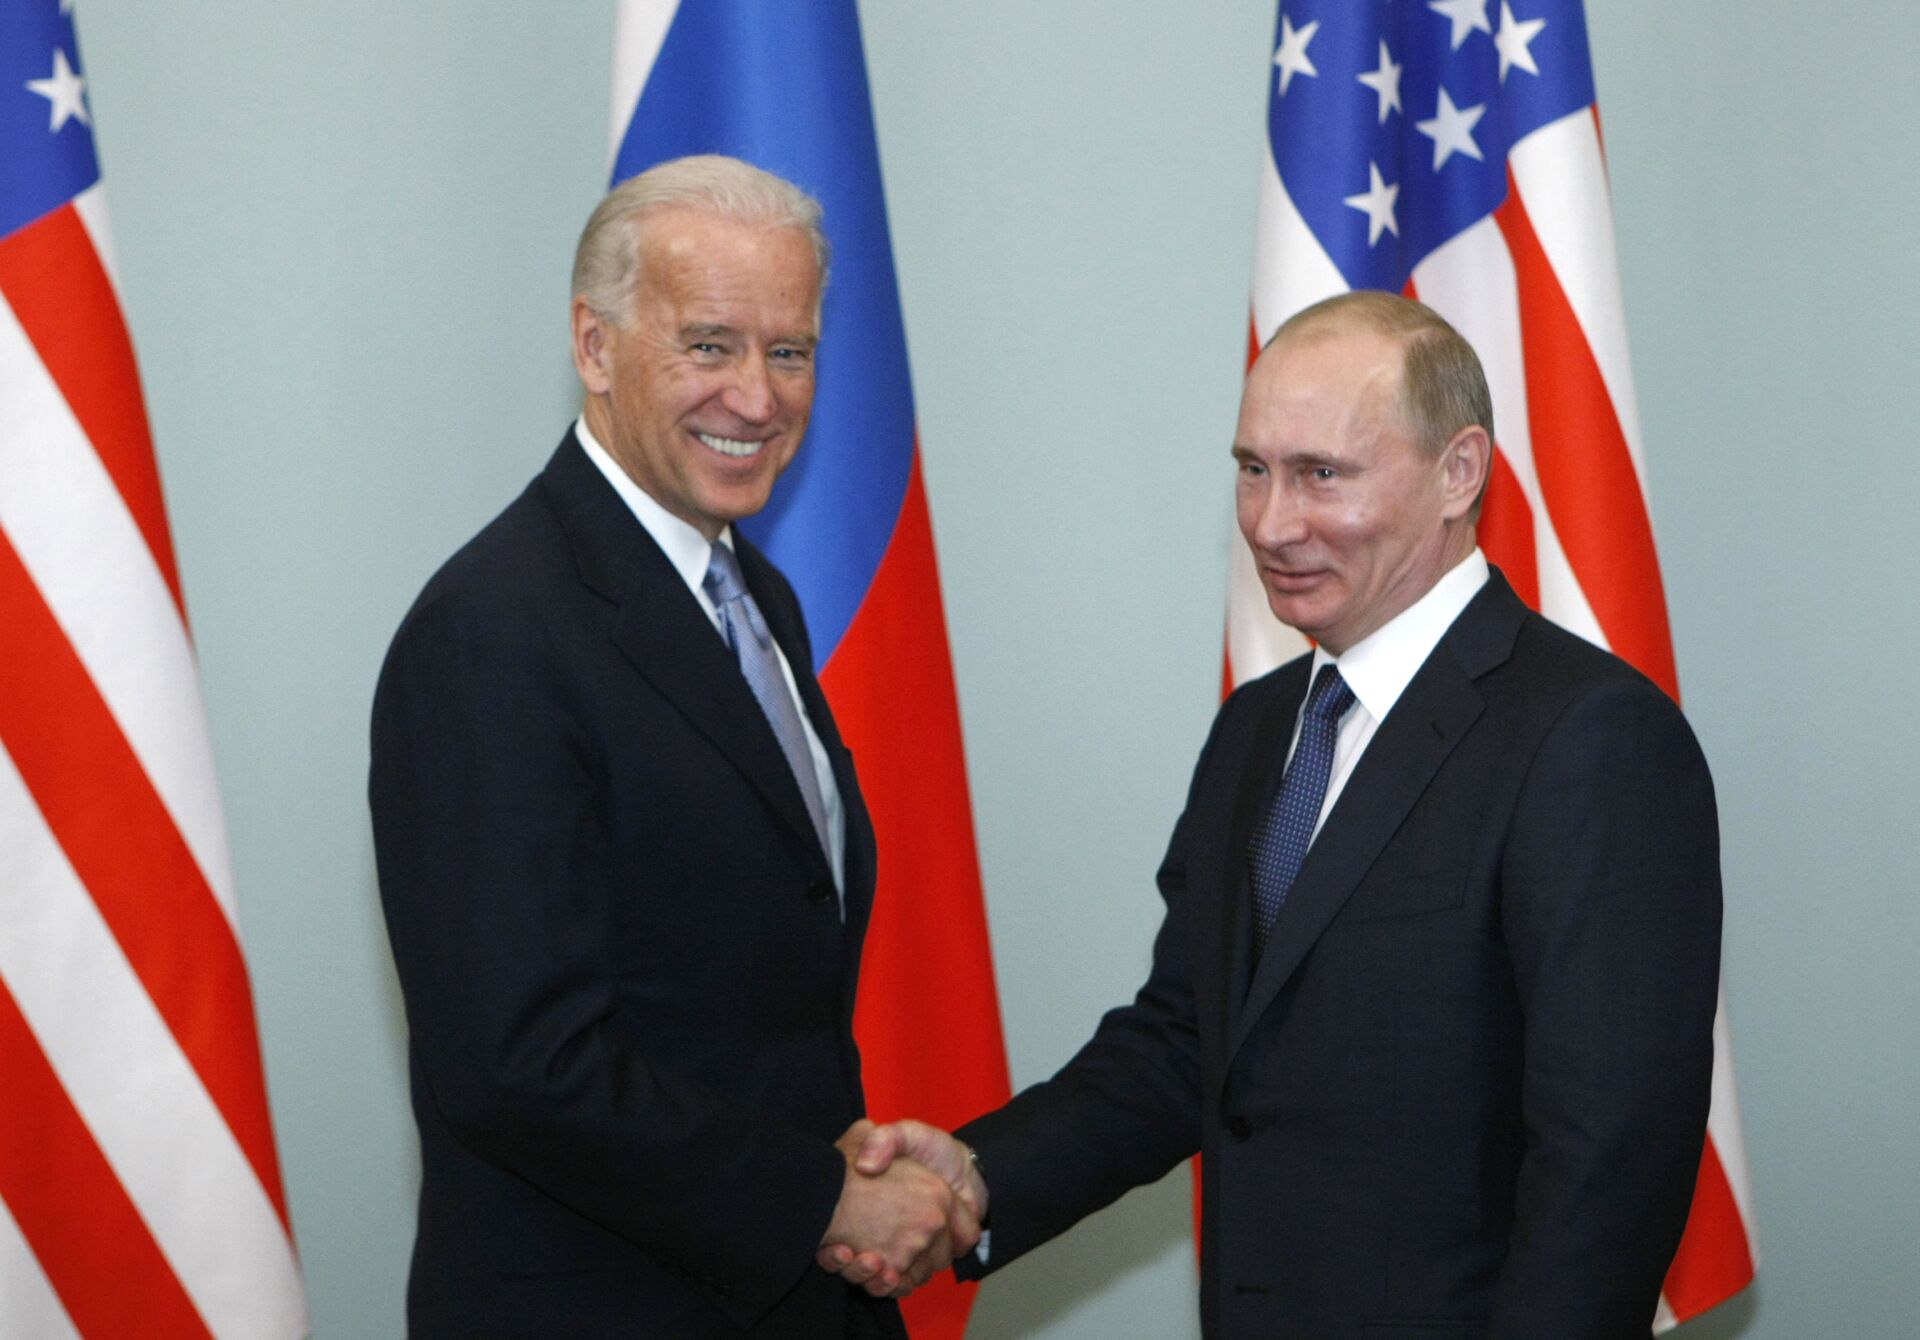 Biden Says US Will Respond in Robust Way When Russian Gov't Engages in 'Harmful Activity' - Sputnik International, 1920, 09.06.2021